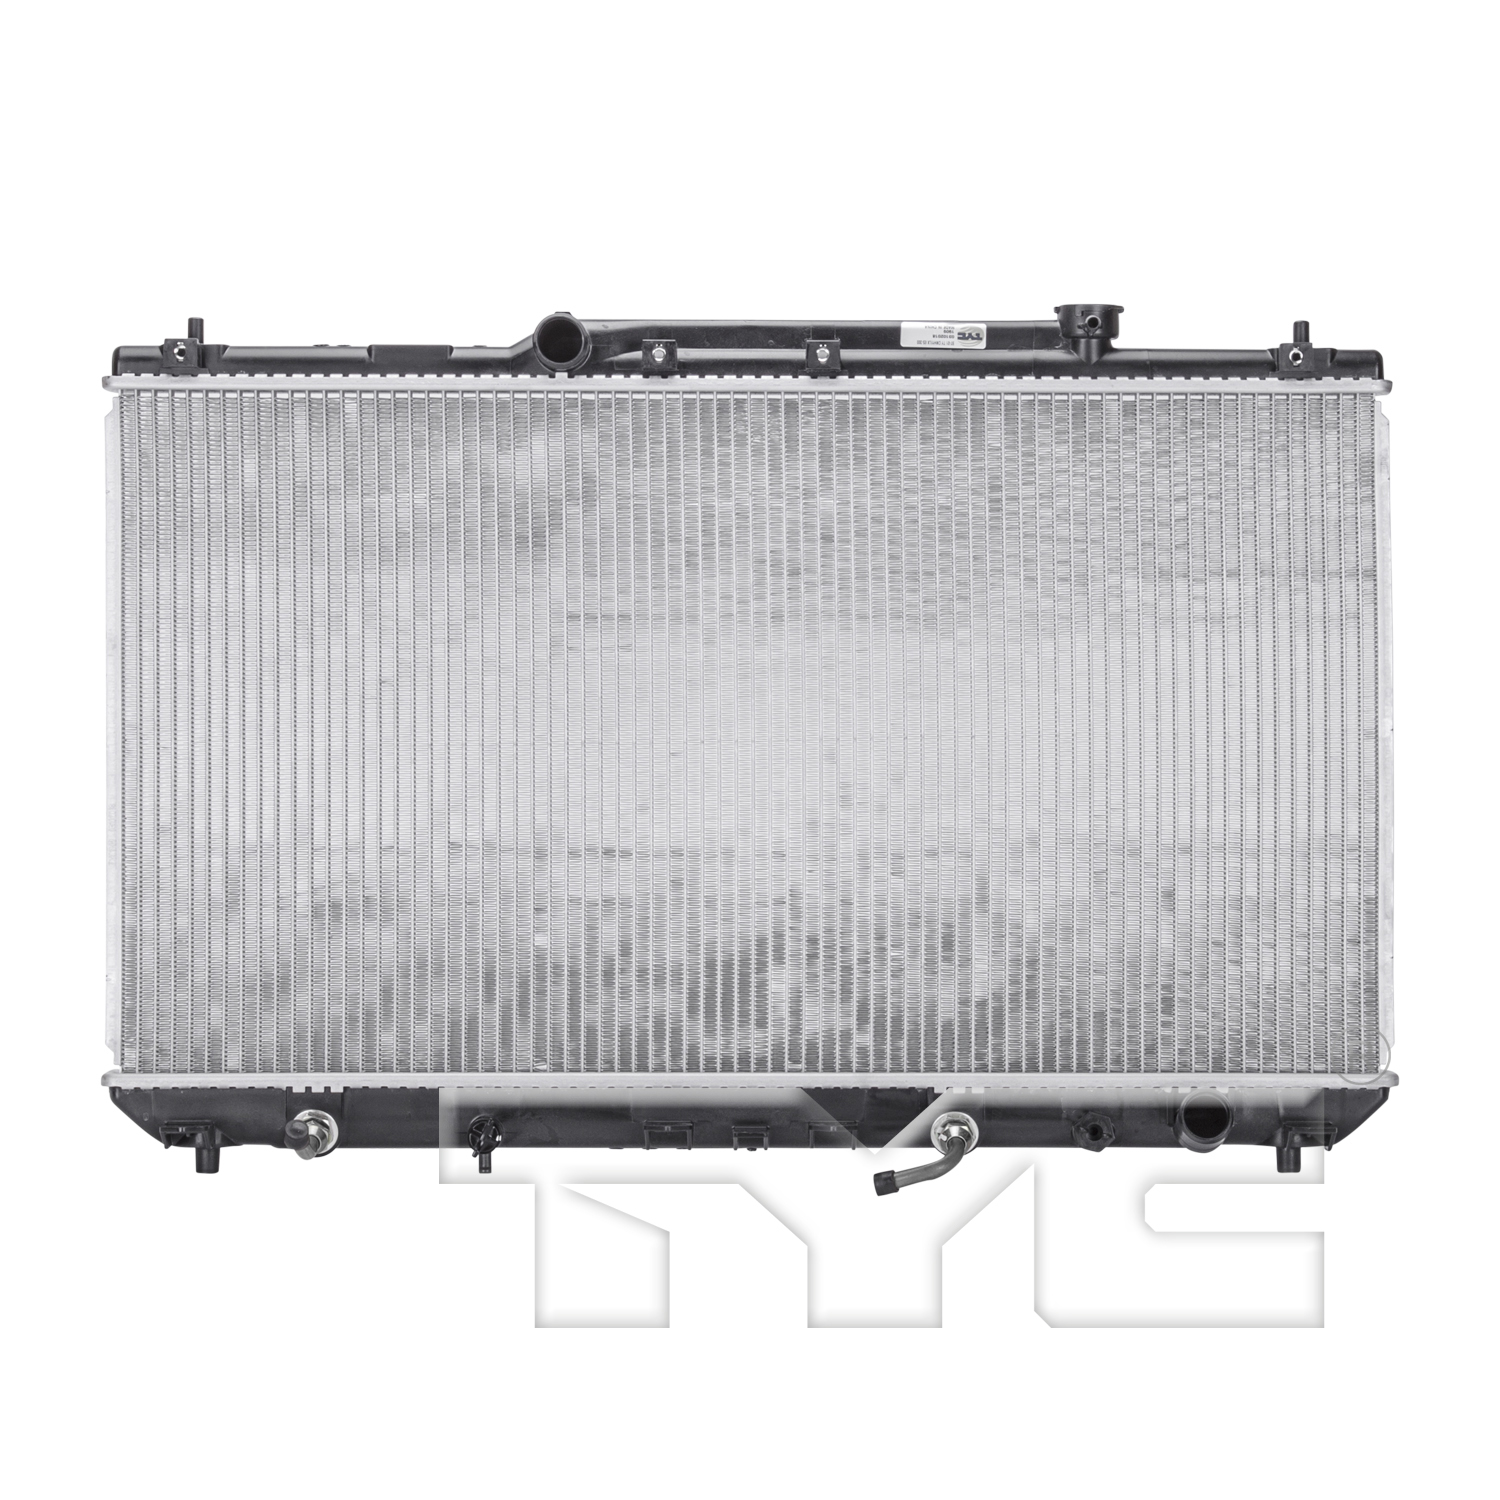 Aftermarket RADIATORS for TOYOTA - CAMRY, CAMRY,97-01,Radiator assembly